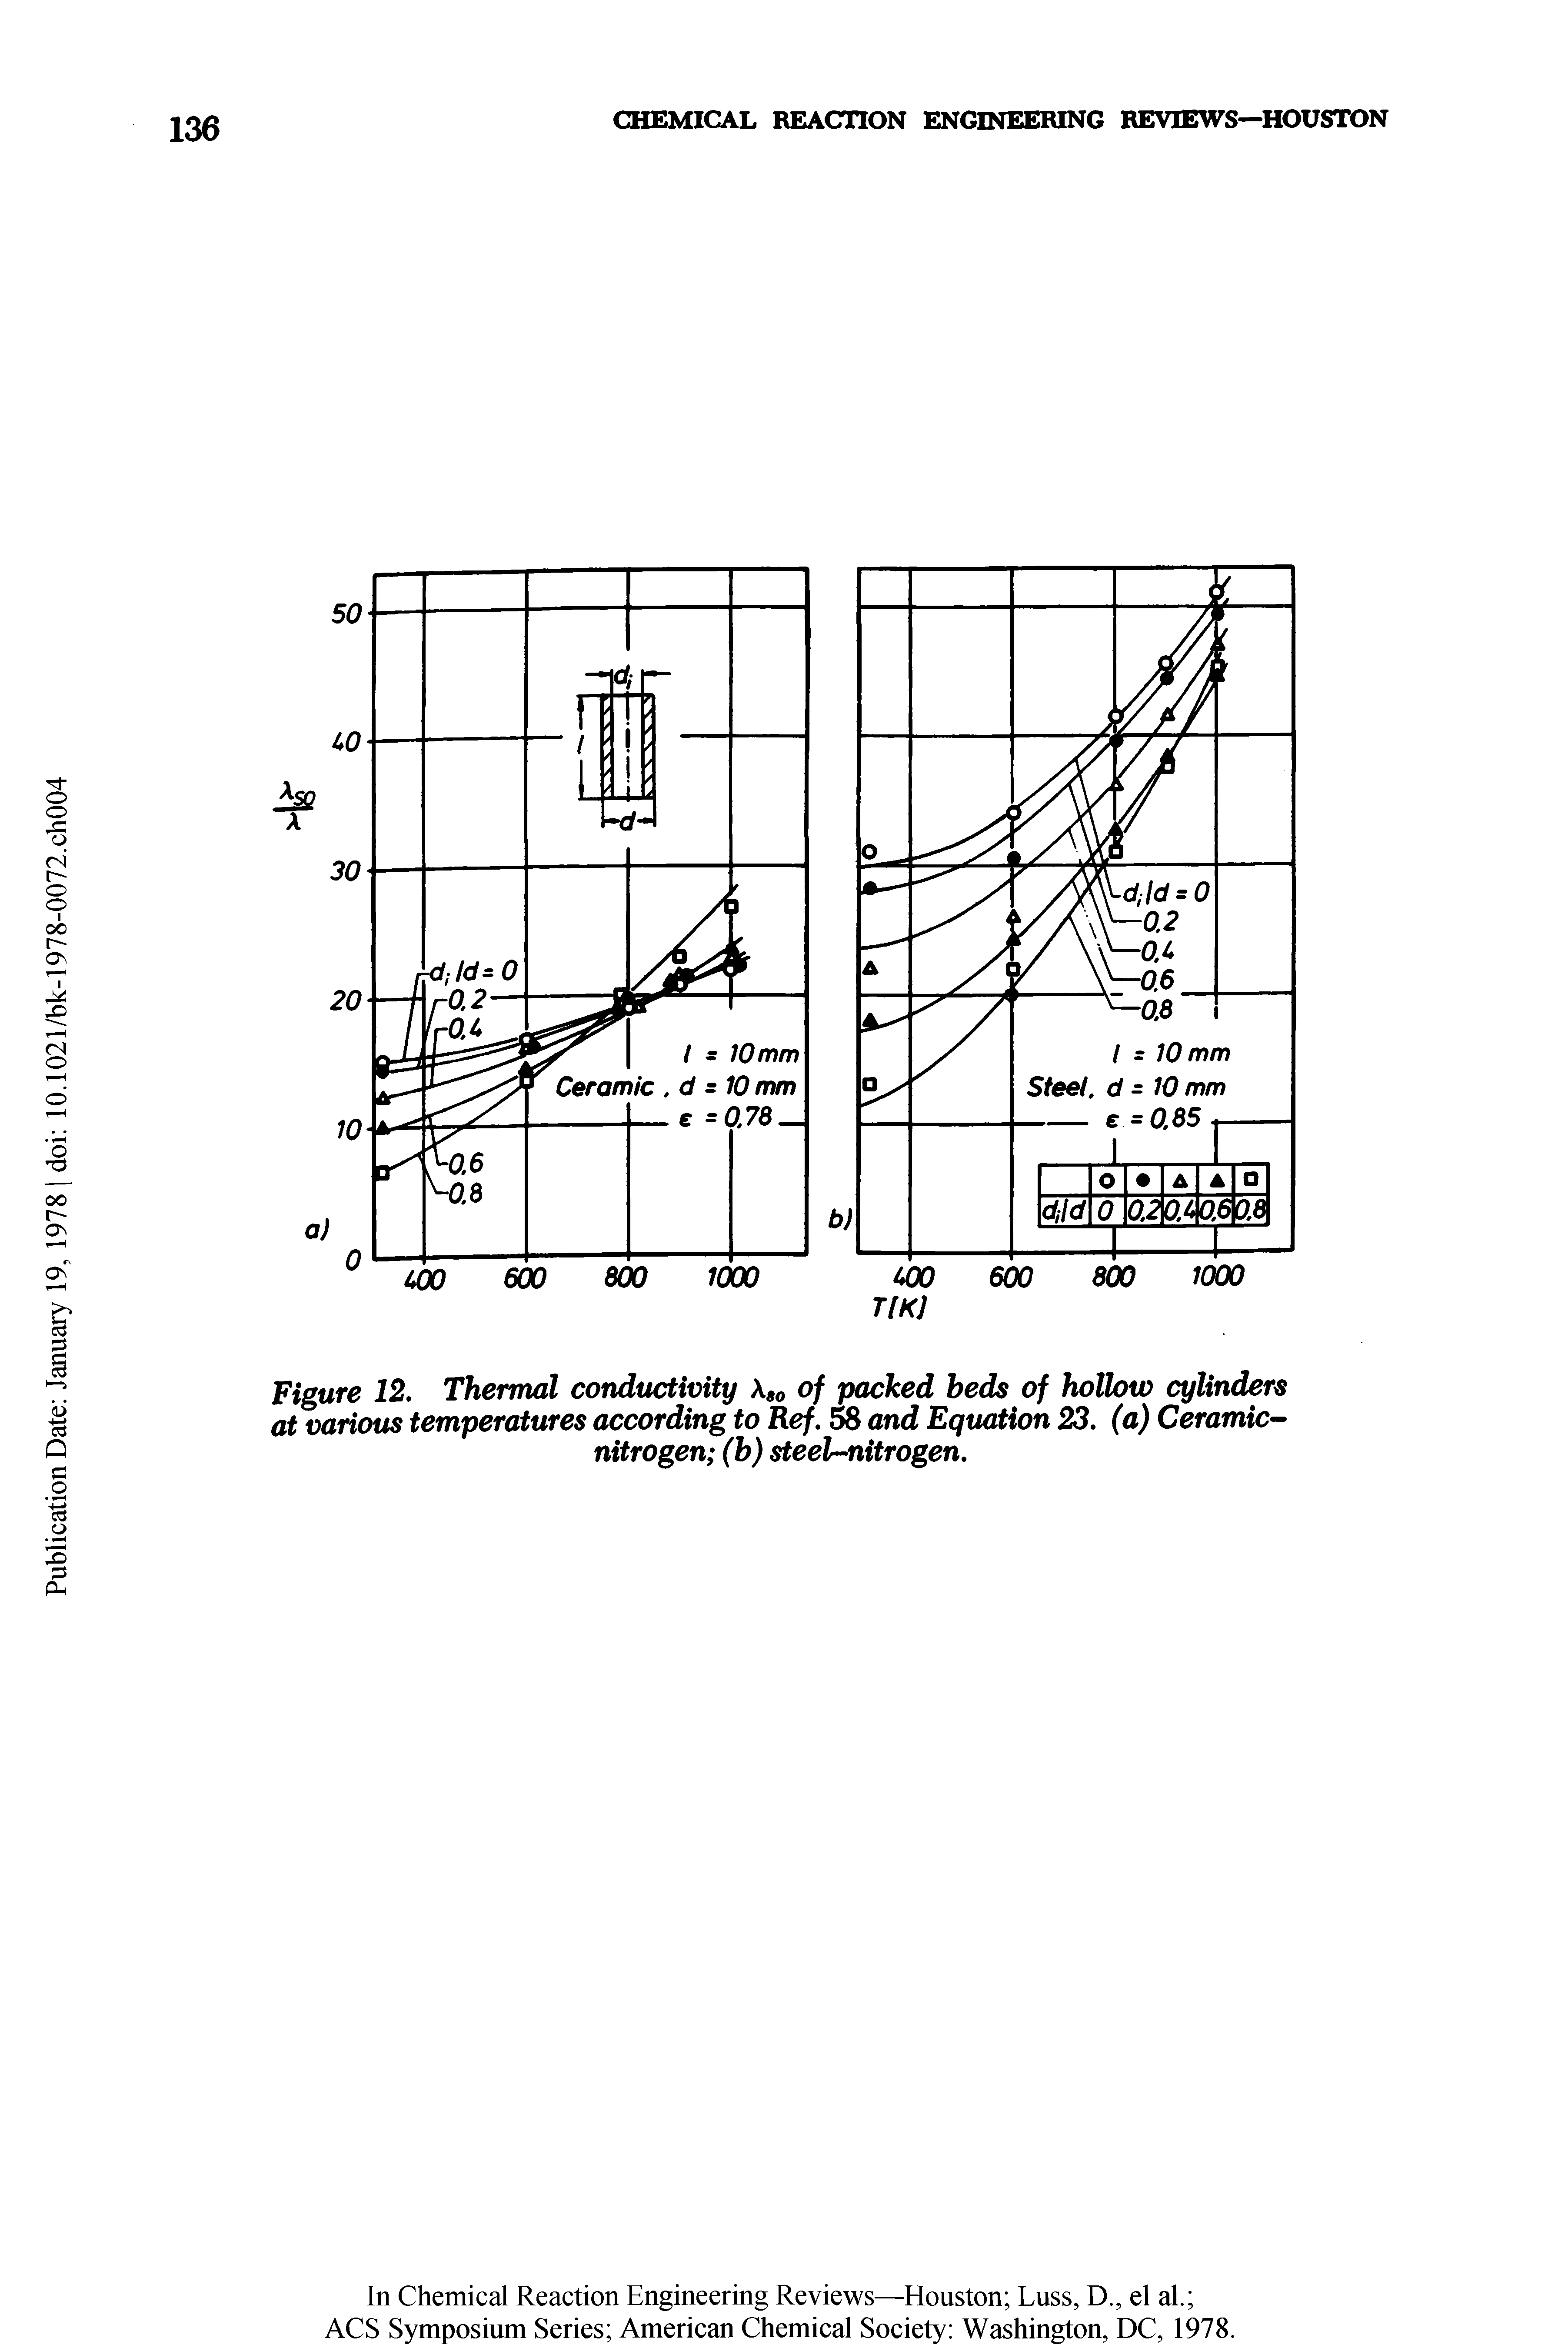 Figure 12, Thermal conductivity of packed beds of hollow cylinders at various temperatures according to Ref. and Equation 23. (a) Ceramic- nitrogen (h) steelnfiitrogen.